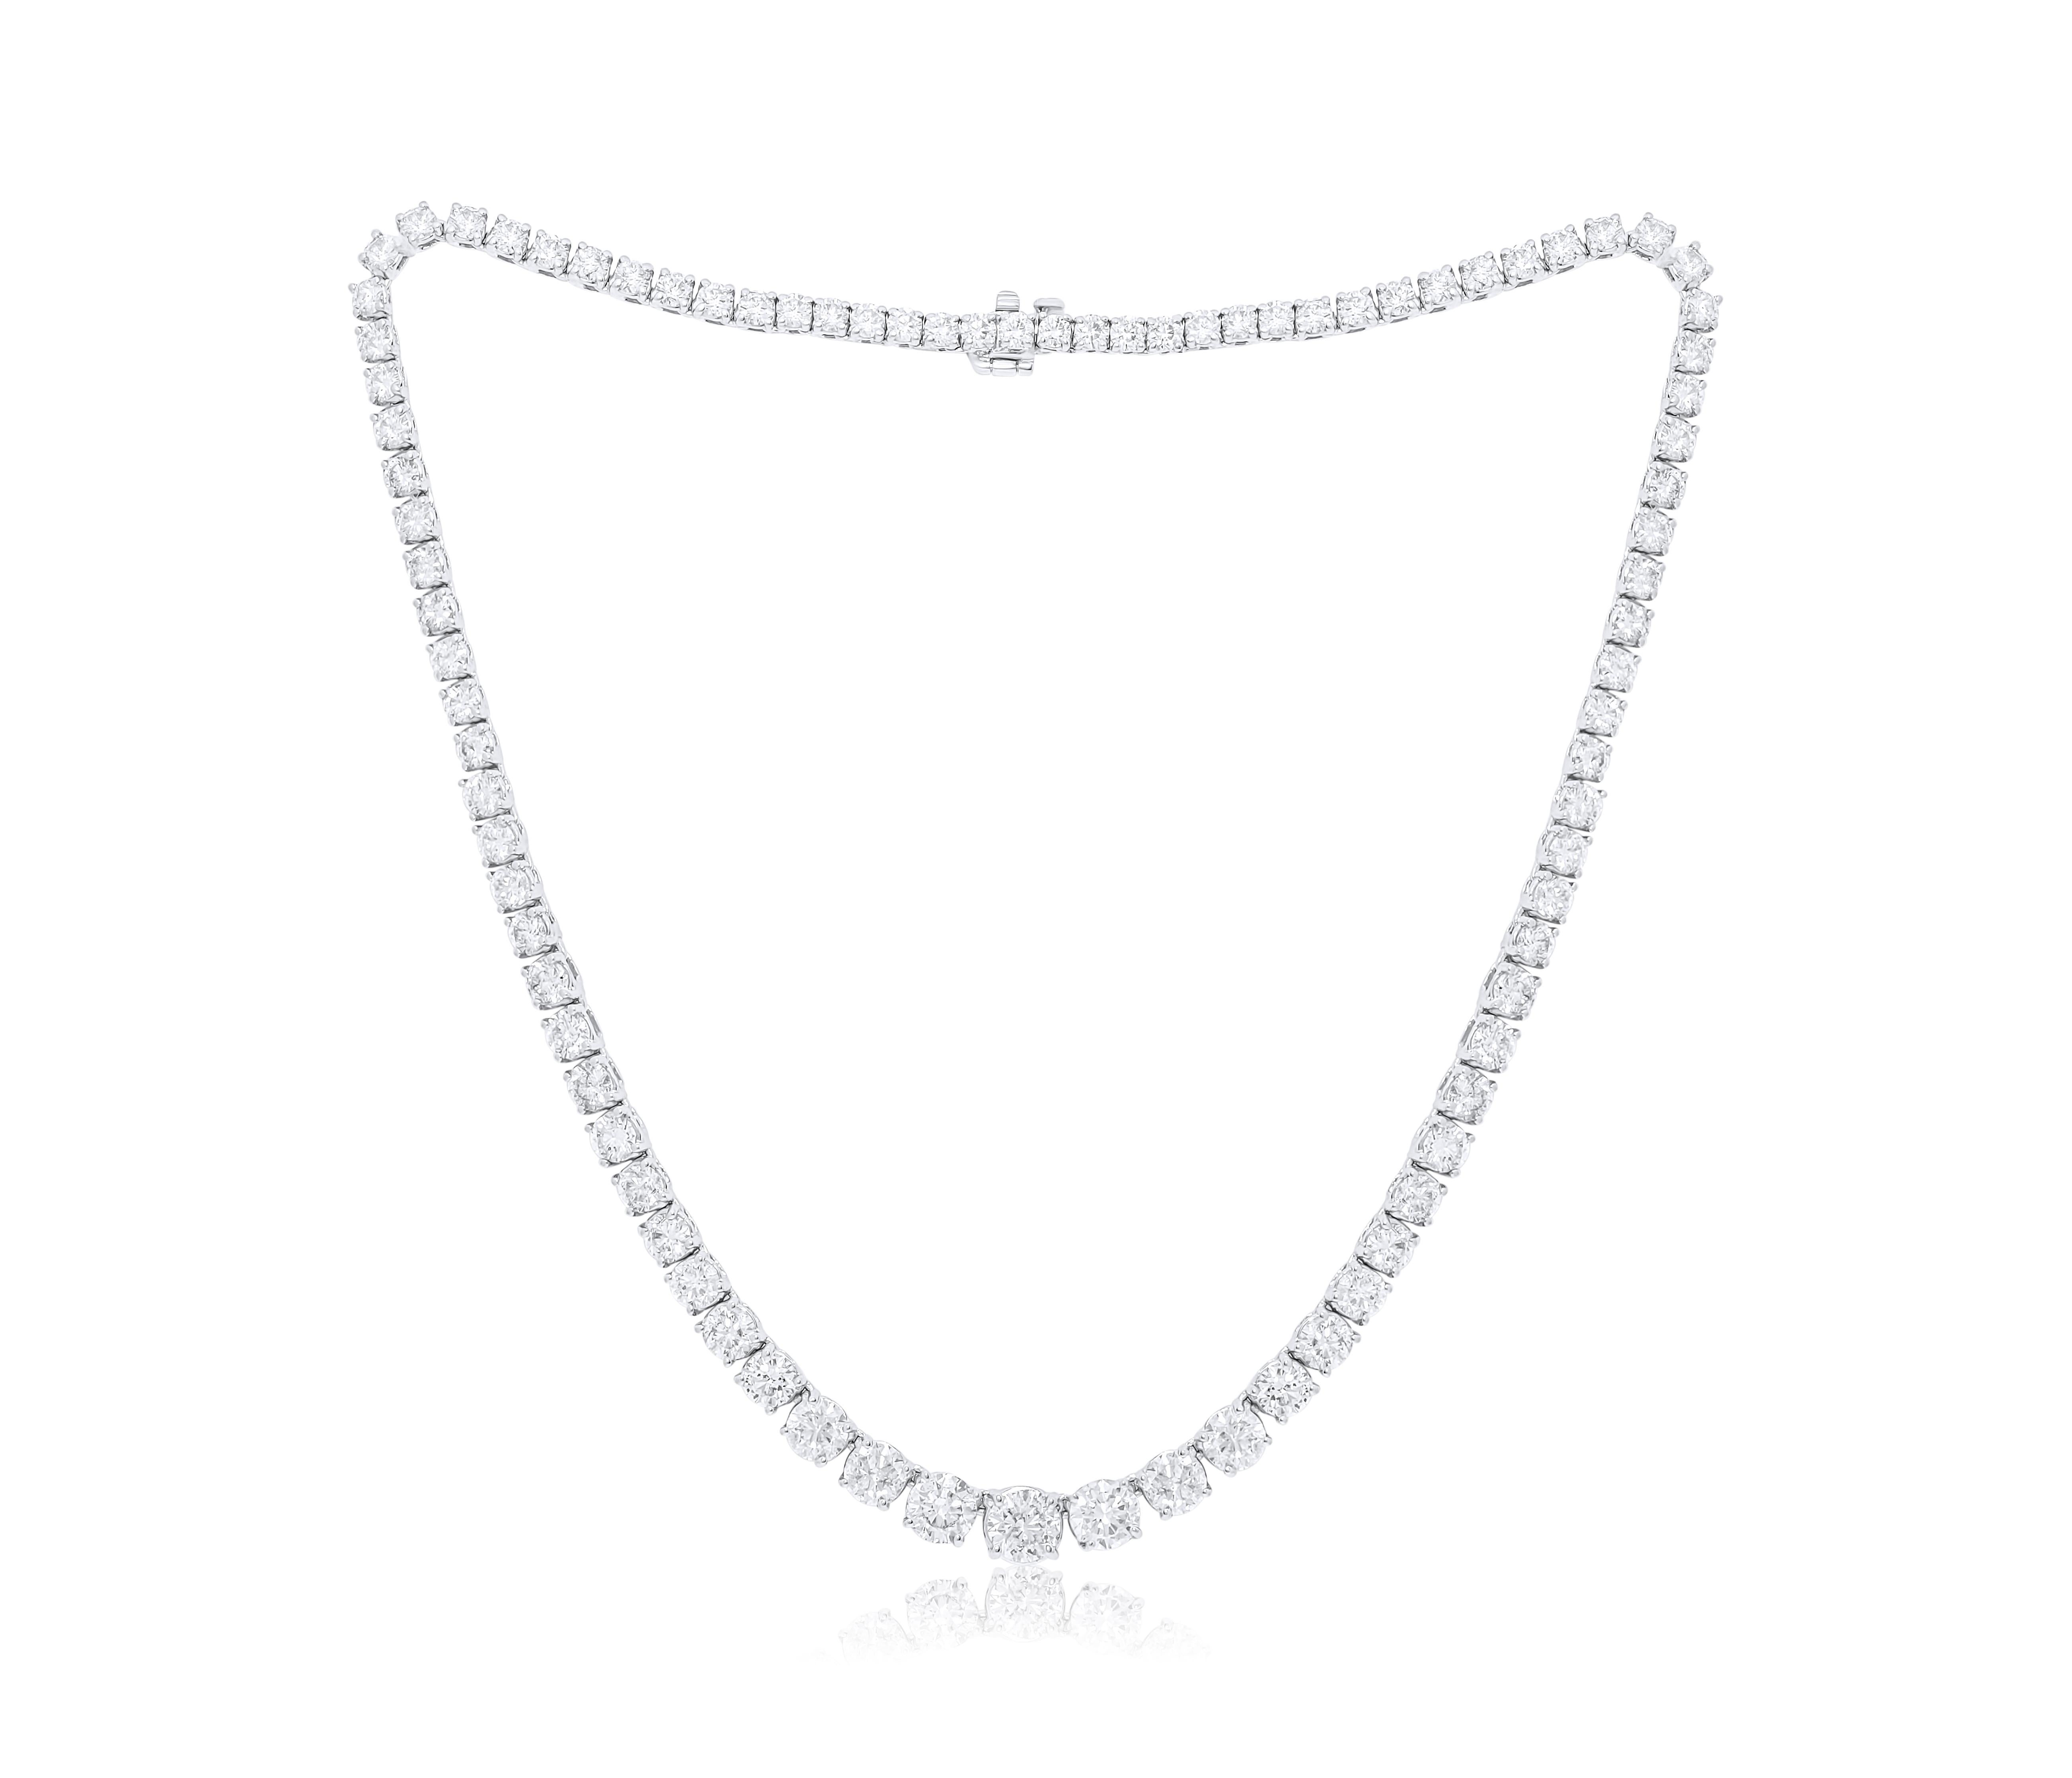 Modern Diana M. 14kt White Gold Graduated Riveira Tennis Necklace  17.60 cts 4 prong For Sale